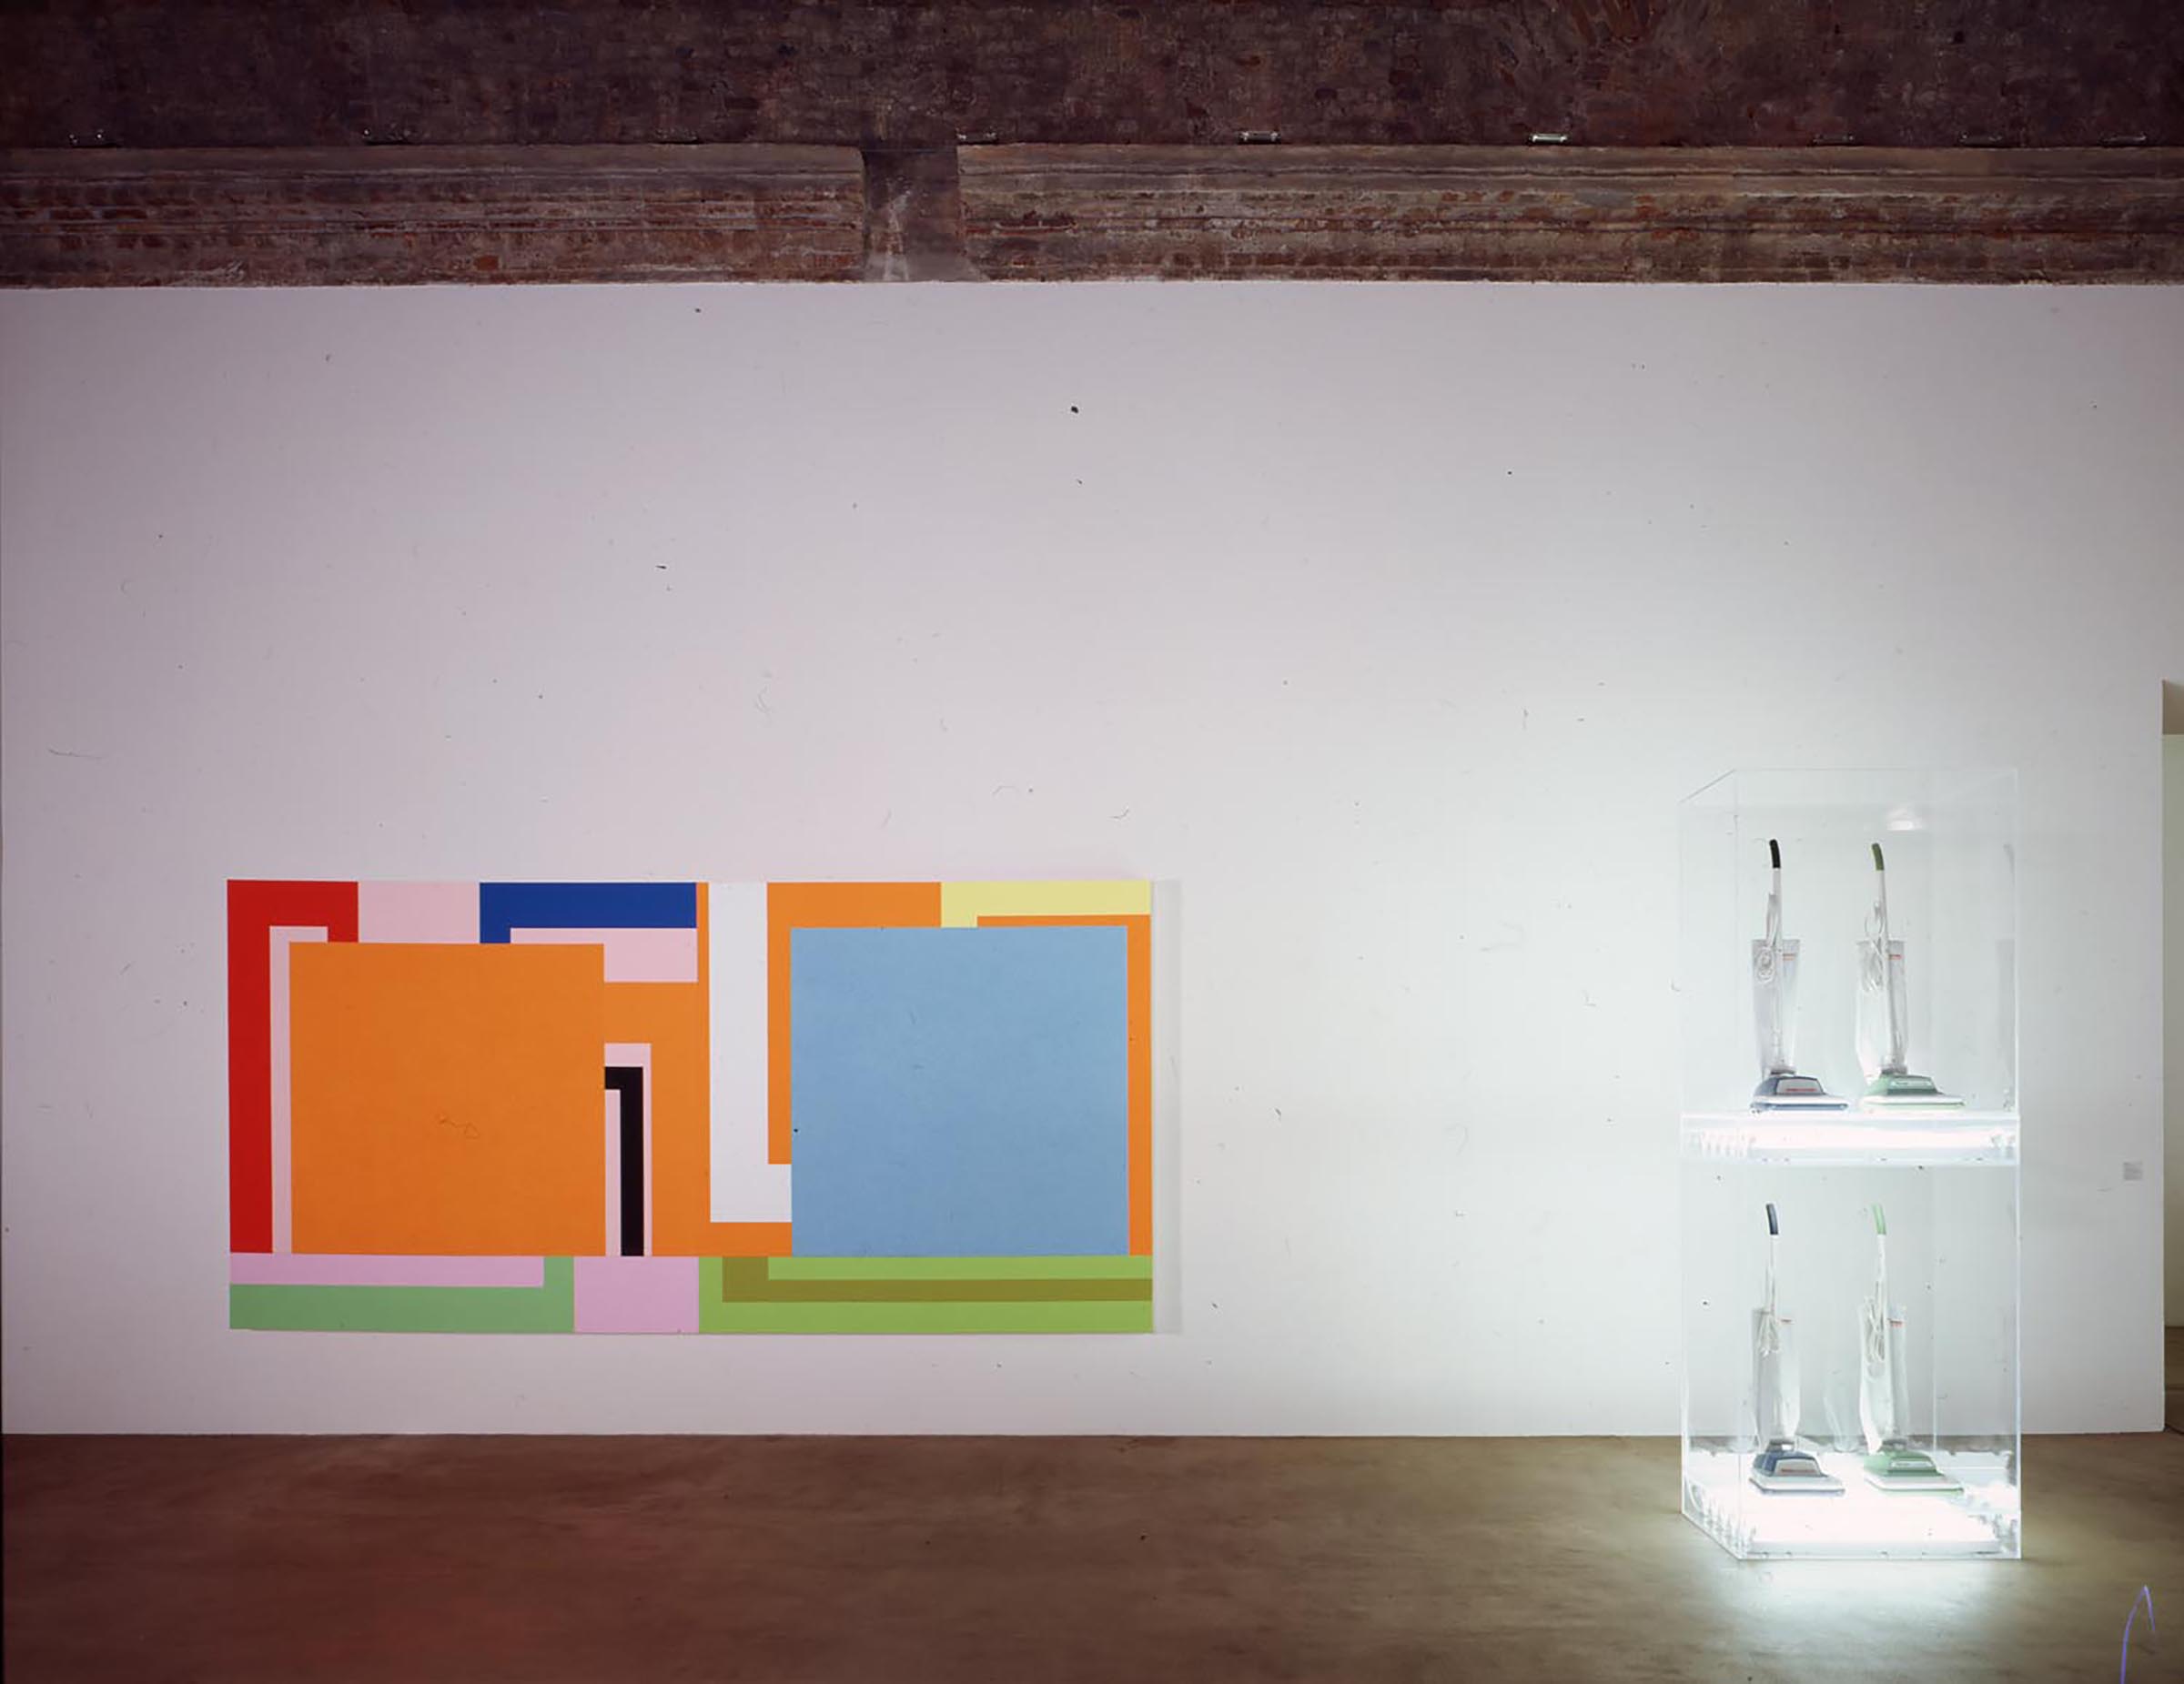 Peter Halley, The Acid Test, 1991-1992 and Jeff Koons, New Hoover convertibles, green, blue; New Hovver convertibles, green, blue; Double-decker, 1981-1987